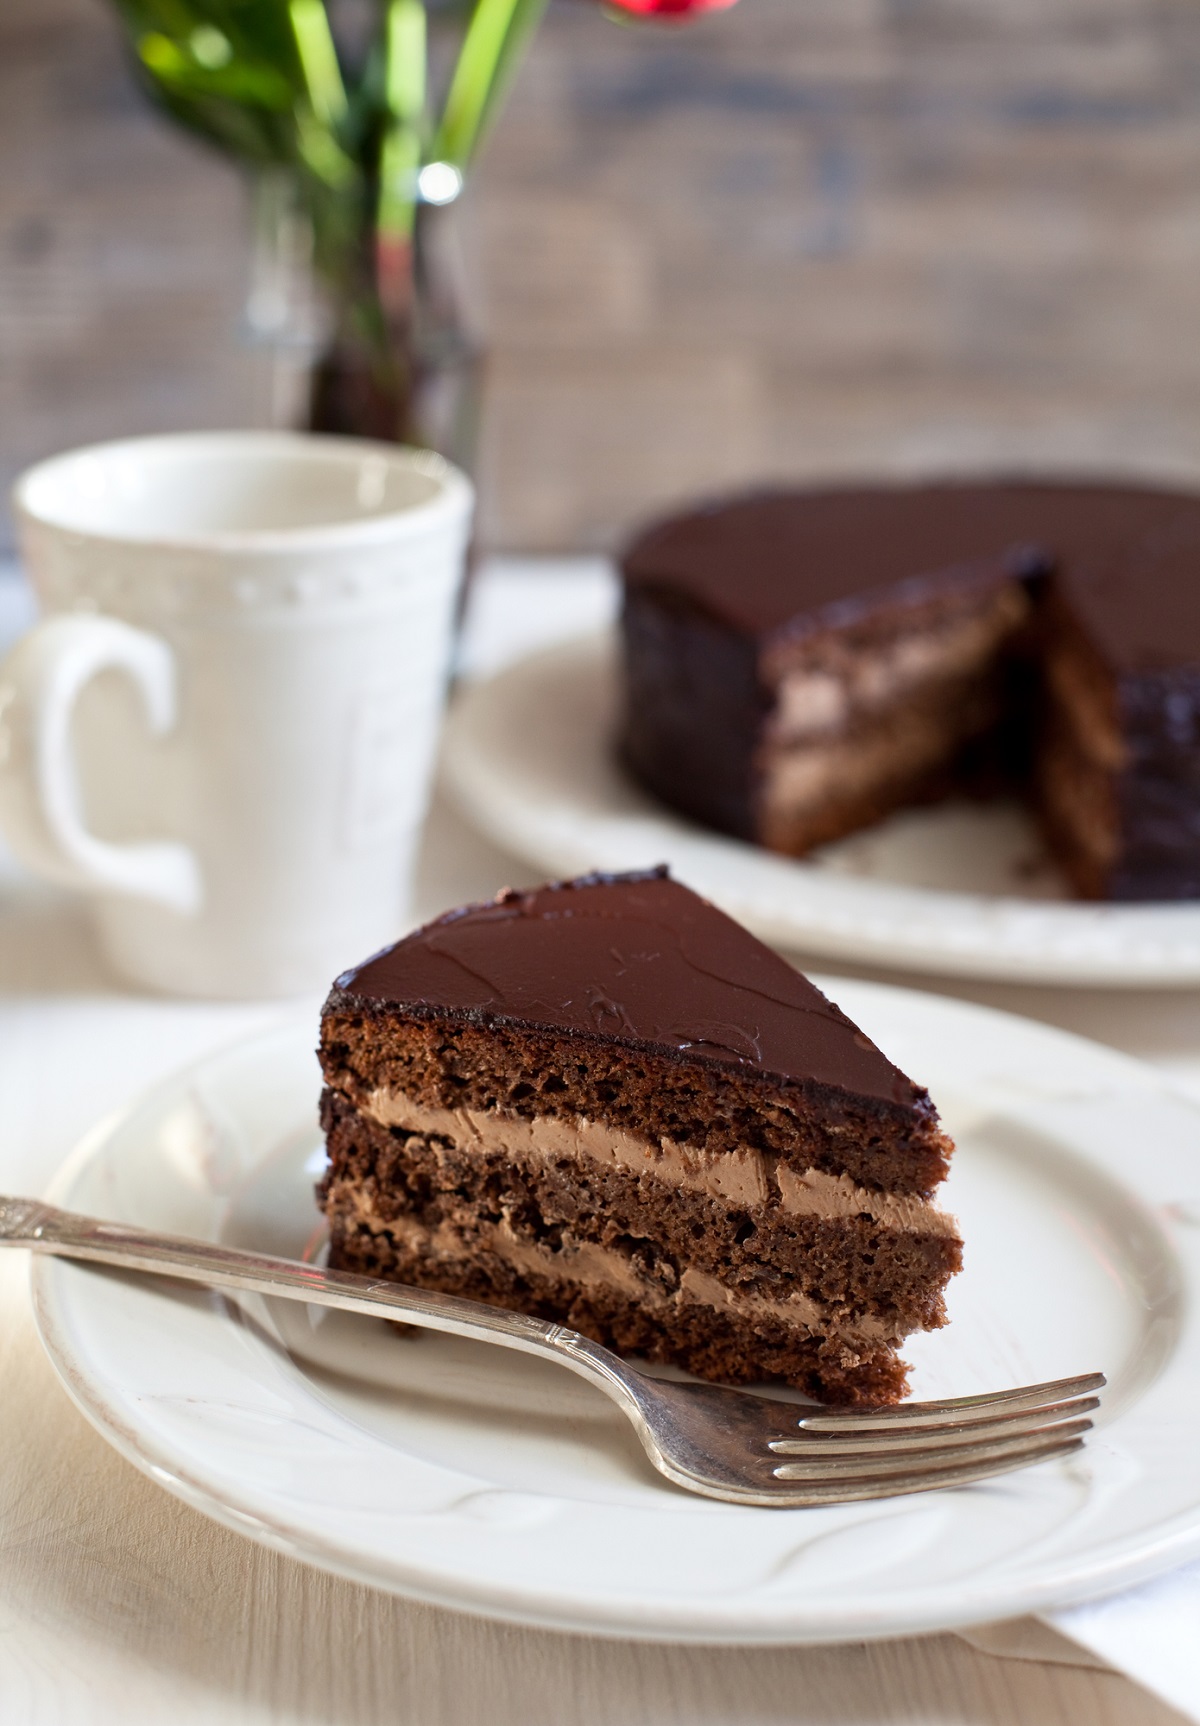 Chocolate mouse cake on a white plate.